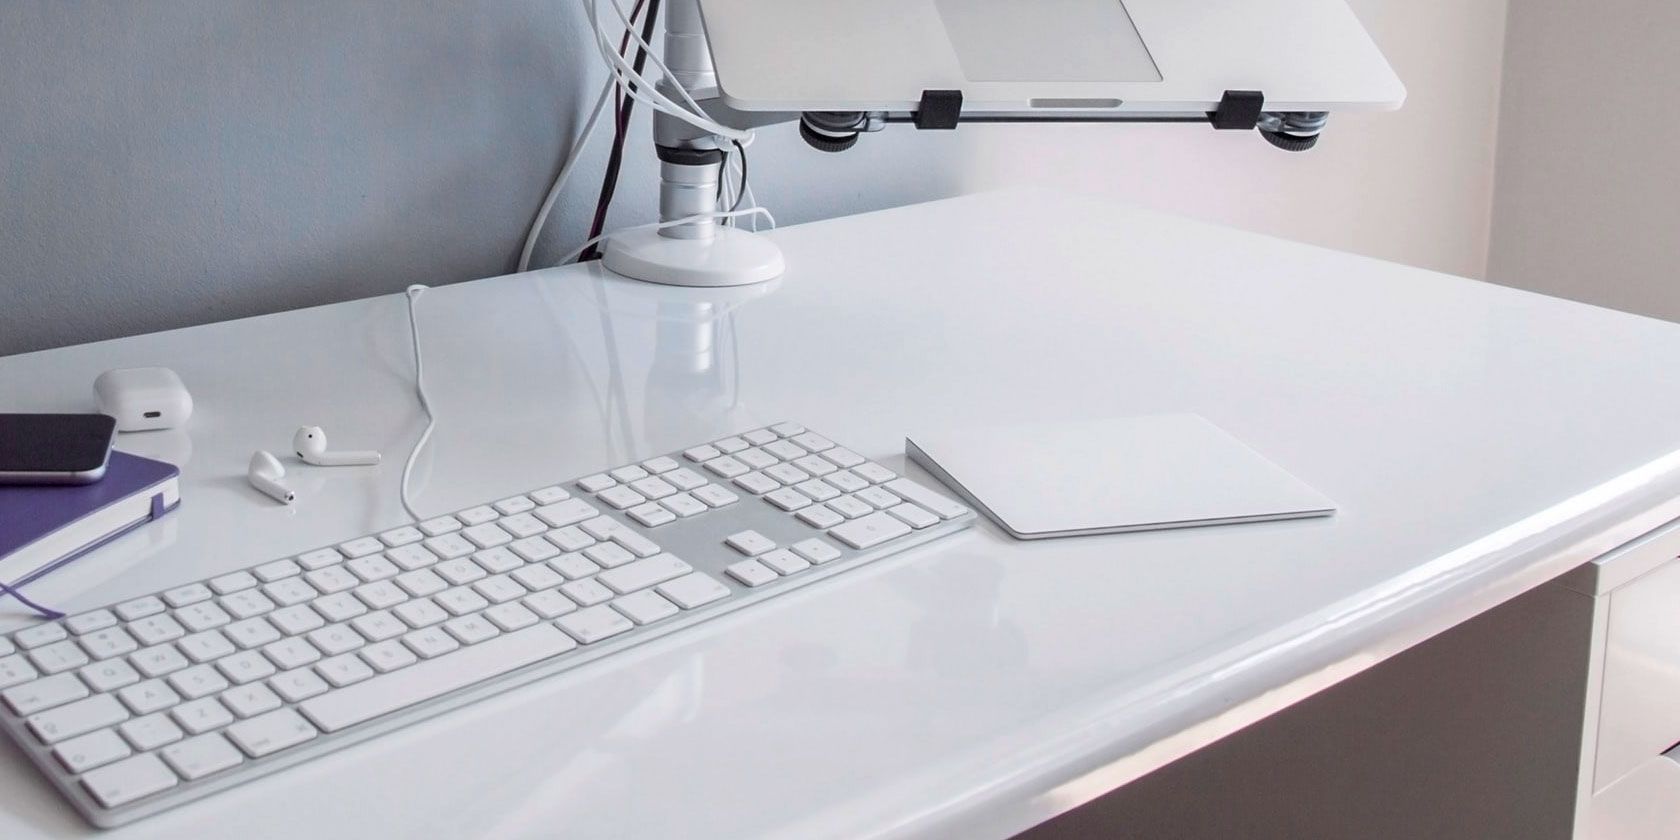 Magic Trackpad vs. Magic Mouse: Which is worth it?